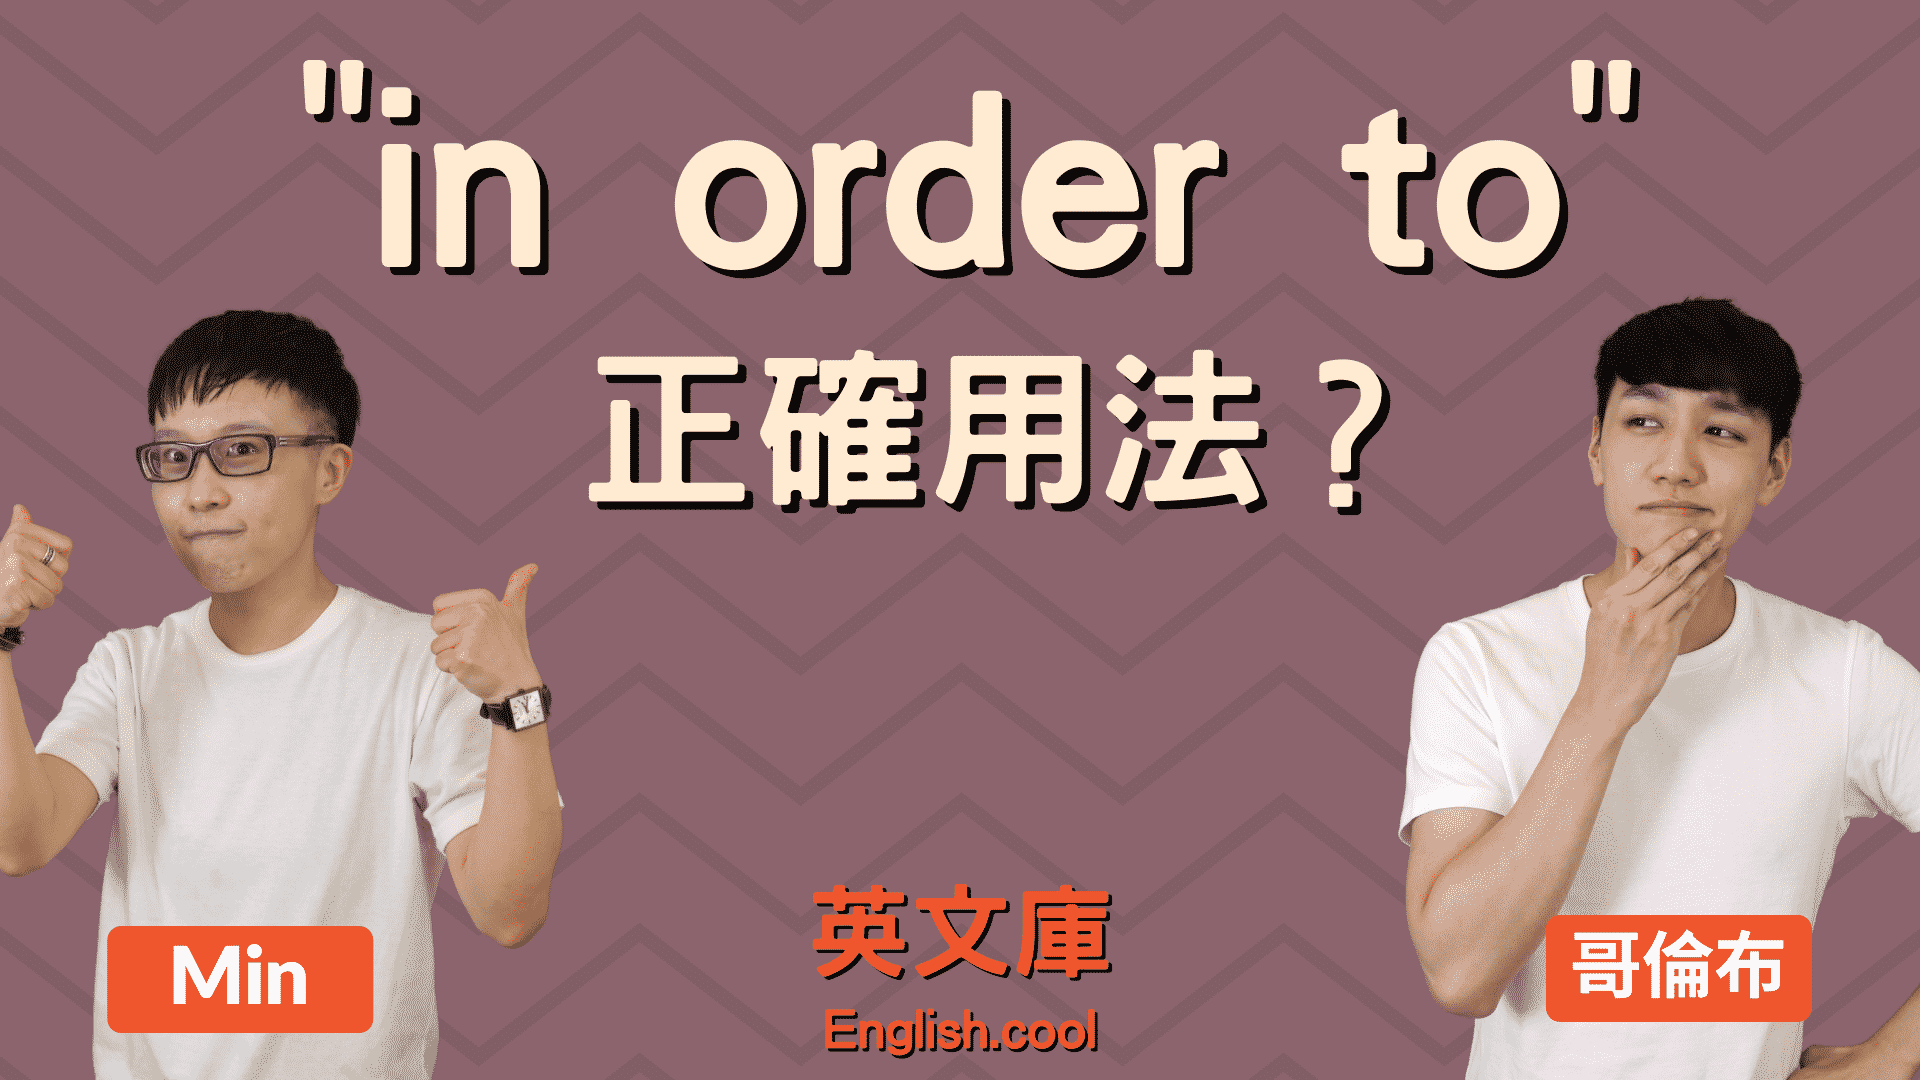 You are currently viewing 「in order to」的正確用法是？放句首？來看例句搞懂！